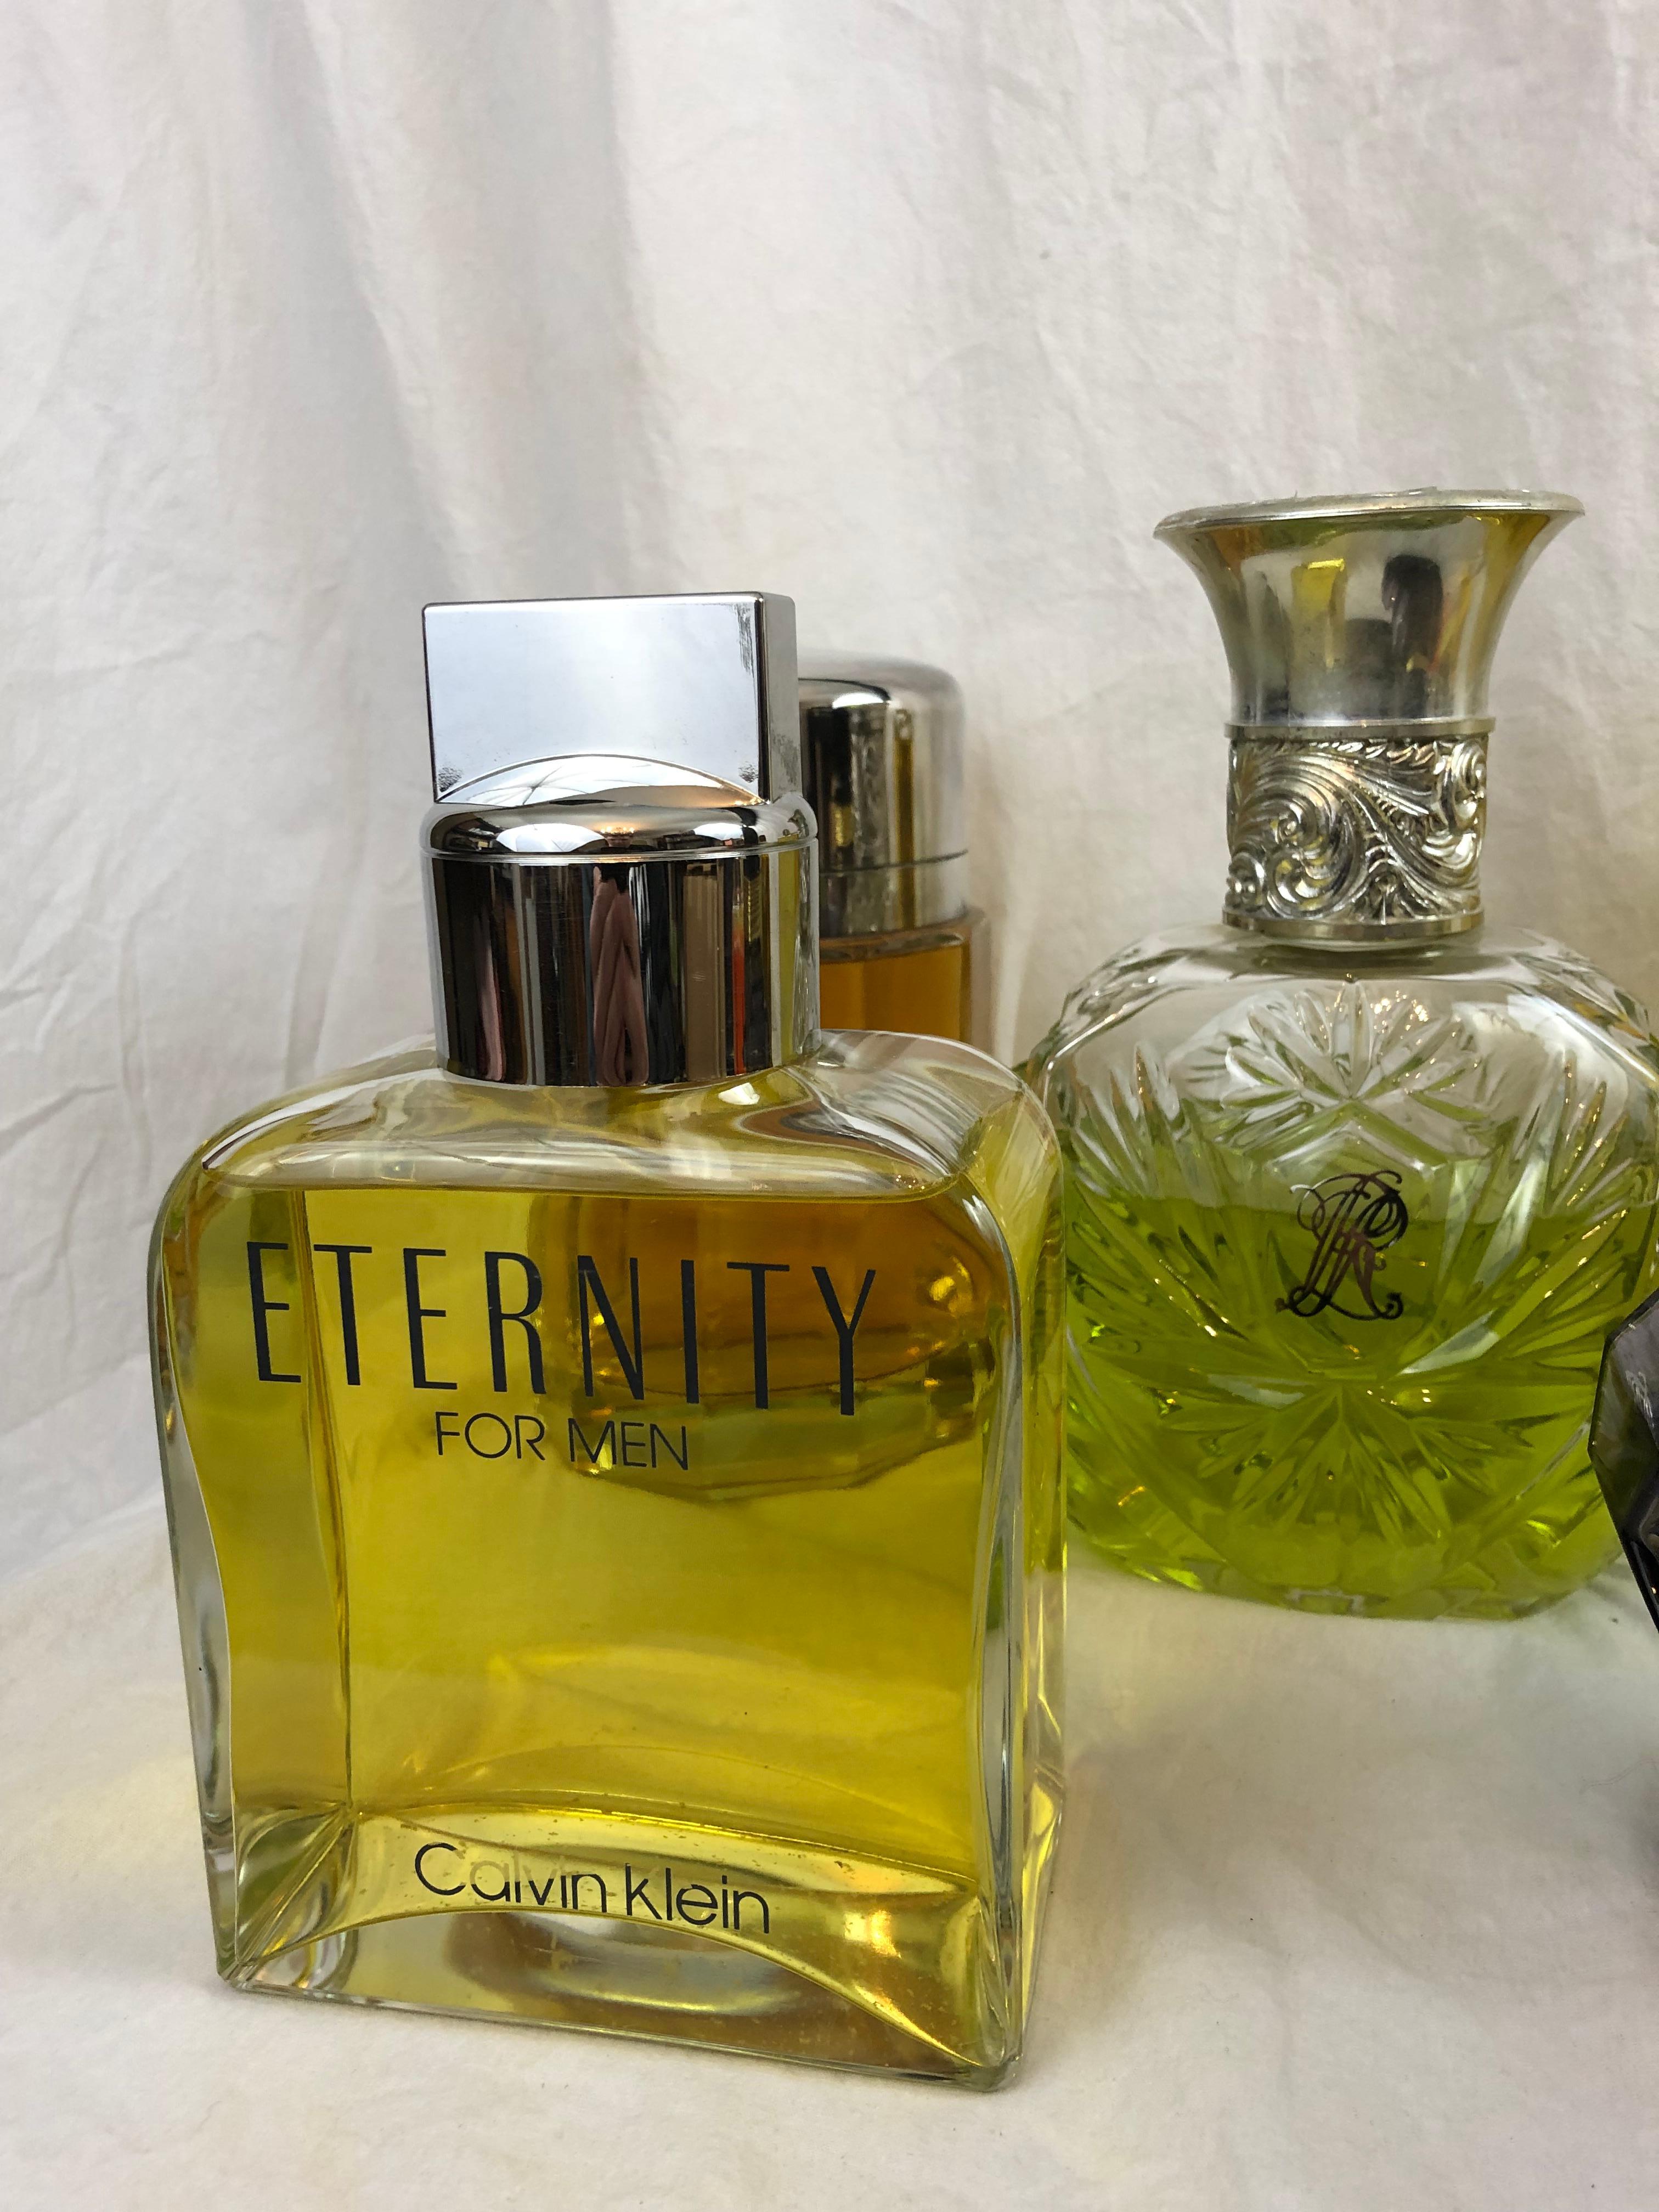 Collection of eight vintage store display fragrance bottles
Measures:
Obsession for men 10